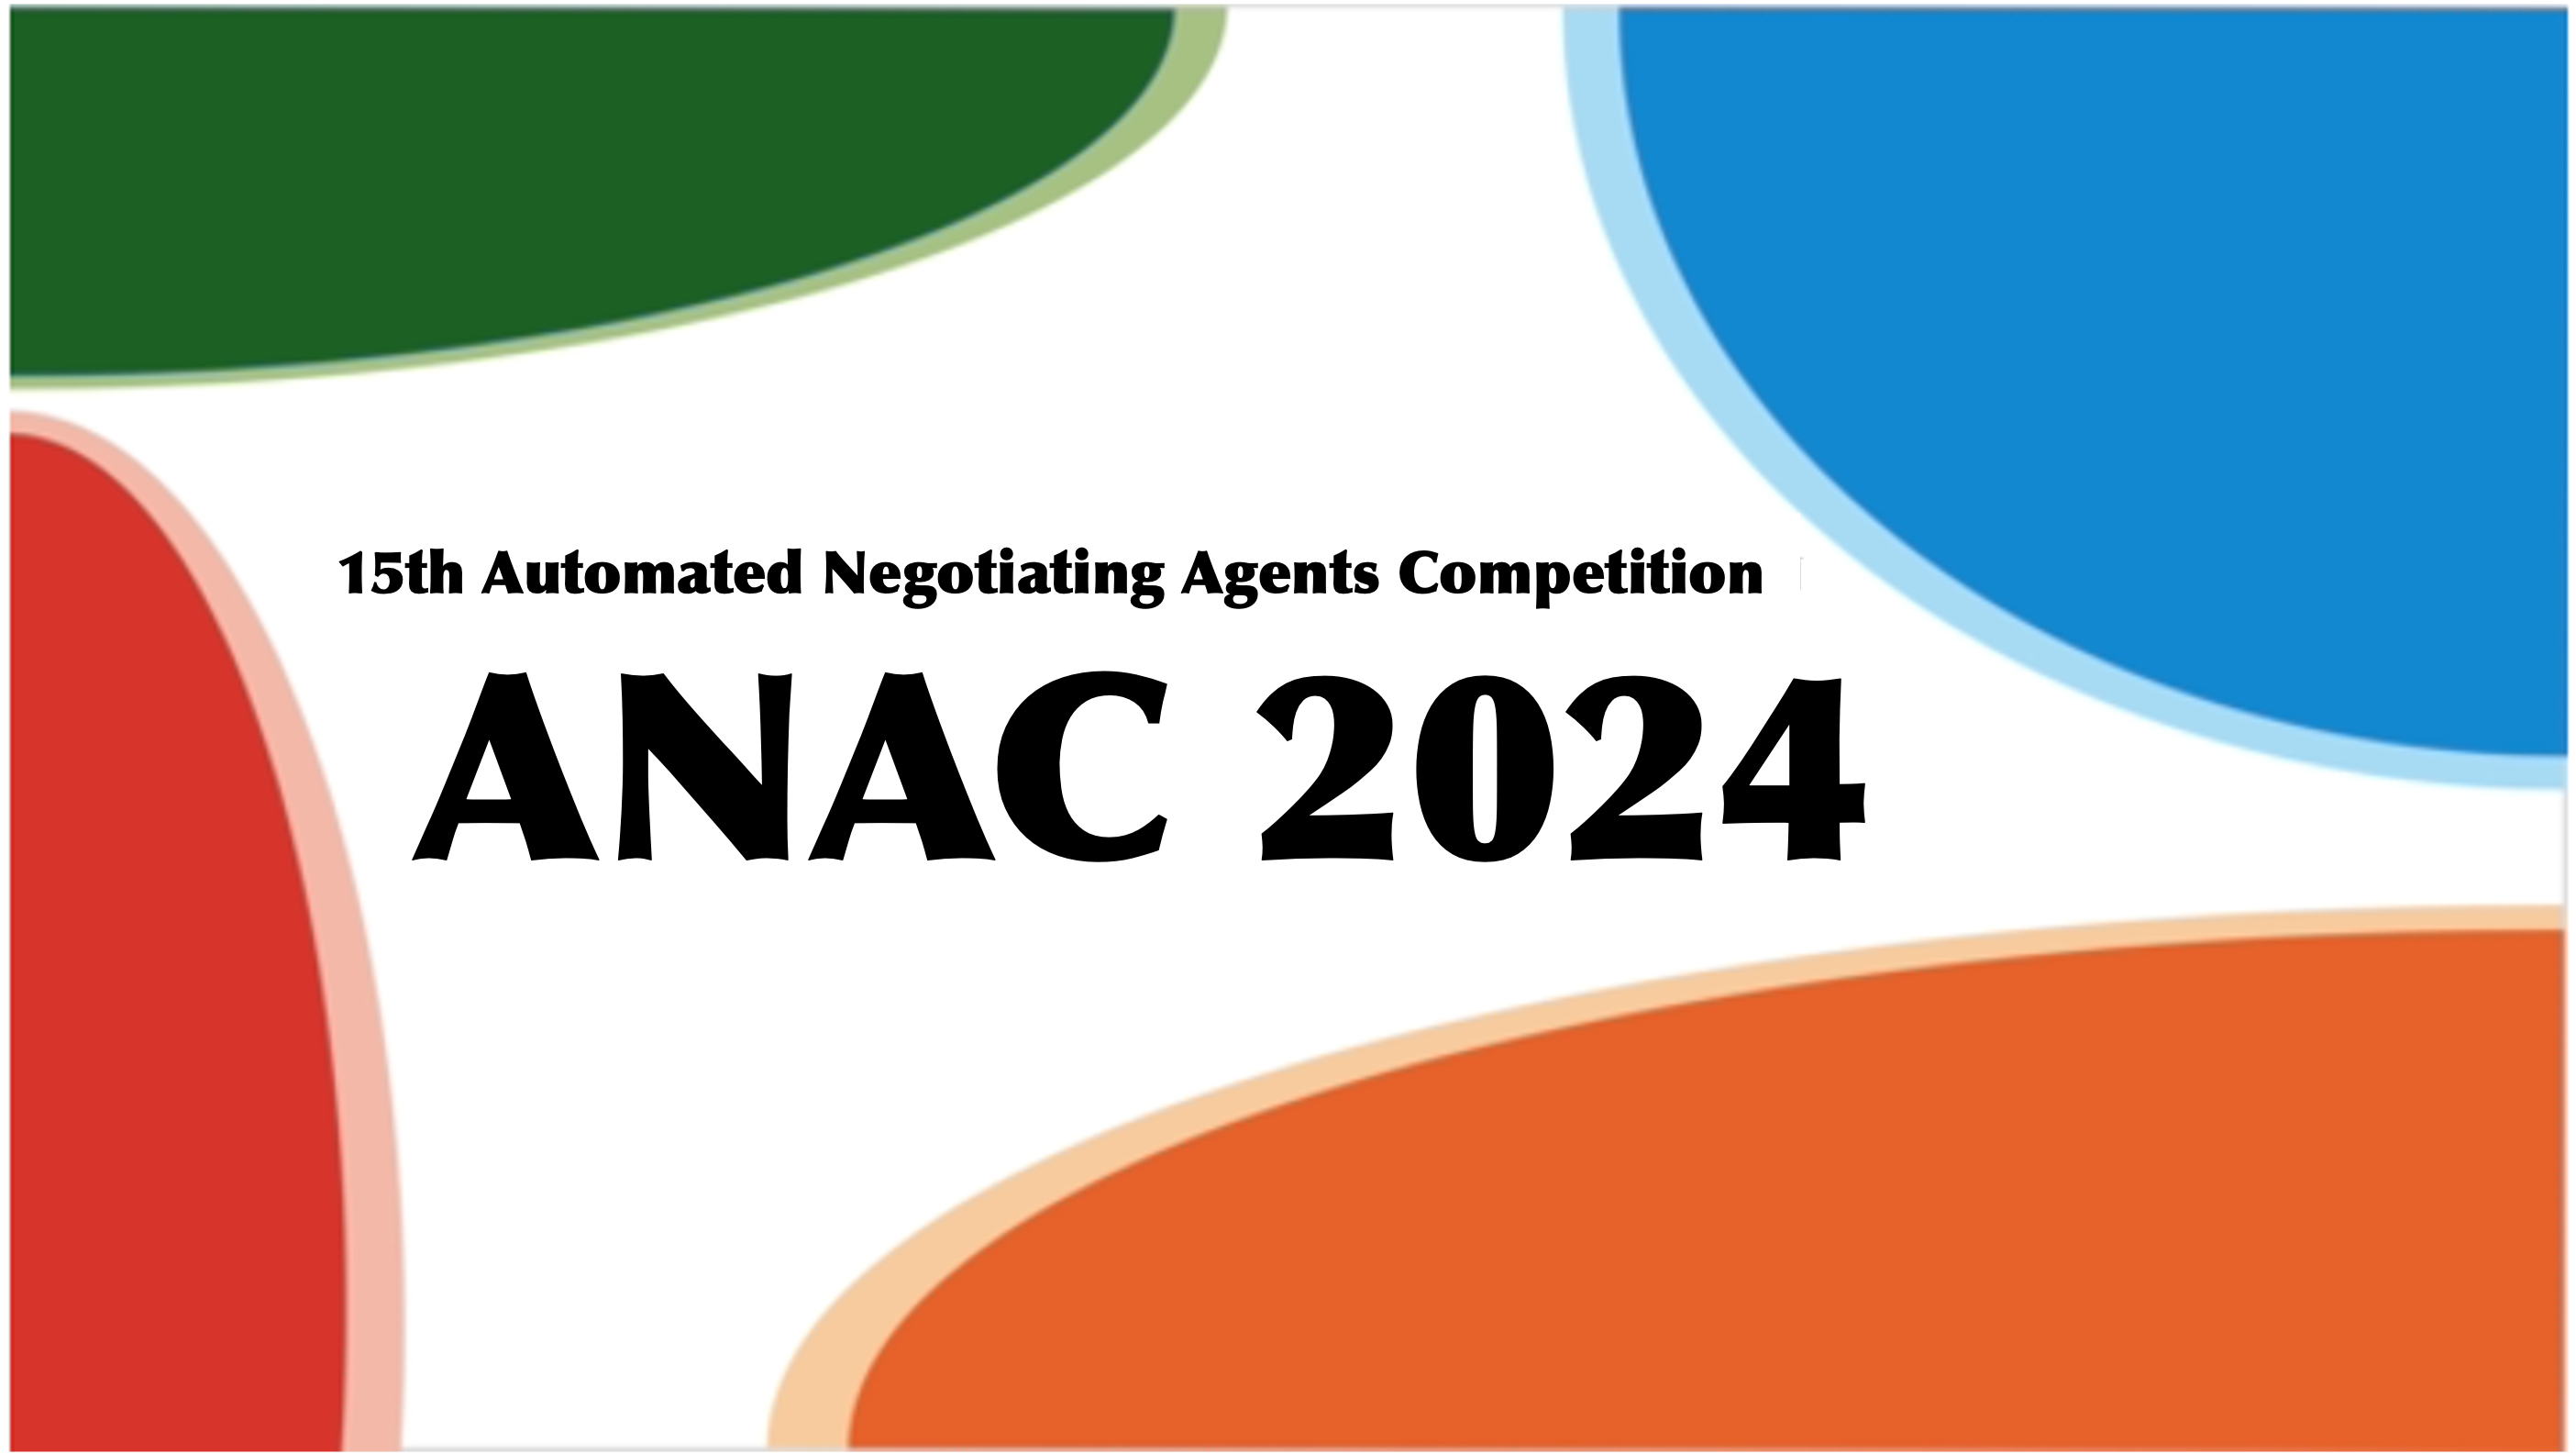 ANAC2024 15th Automated Negotiating Agents Competition